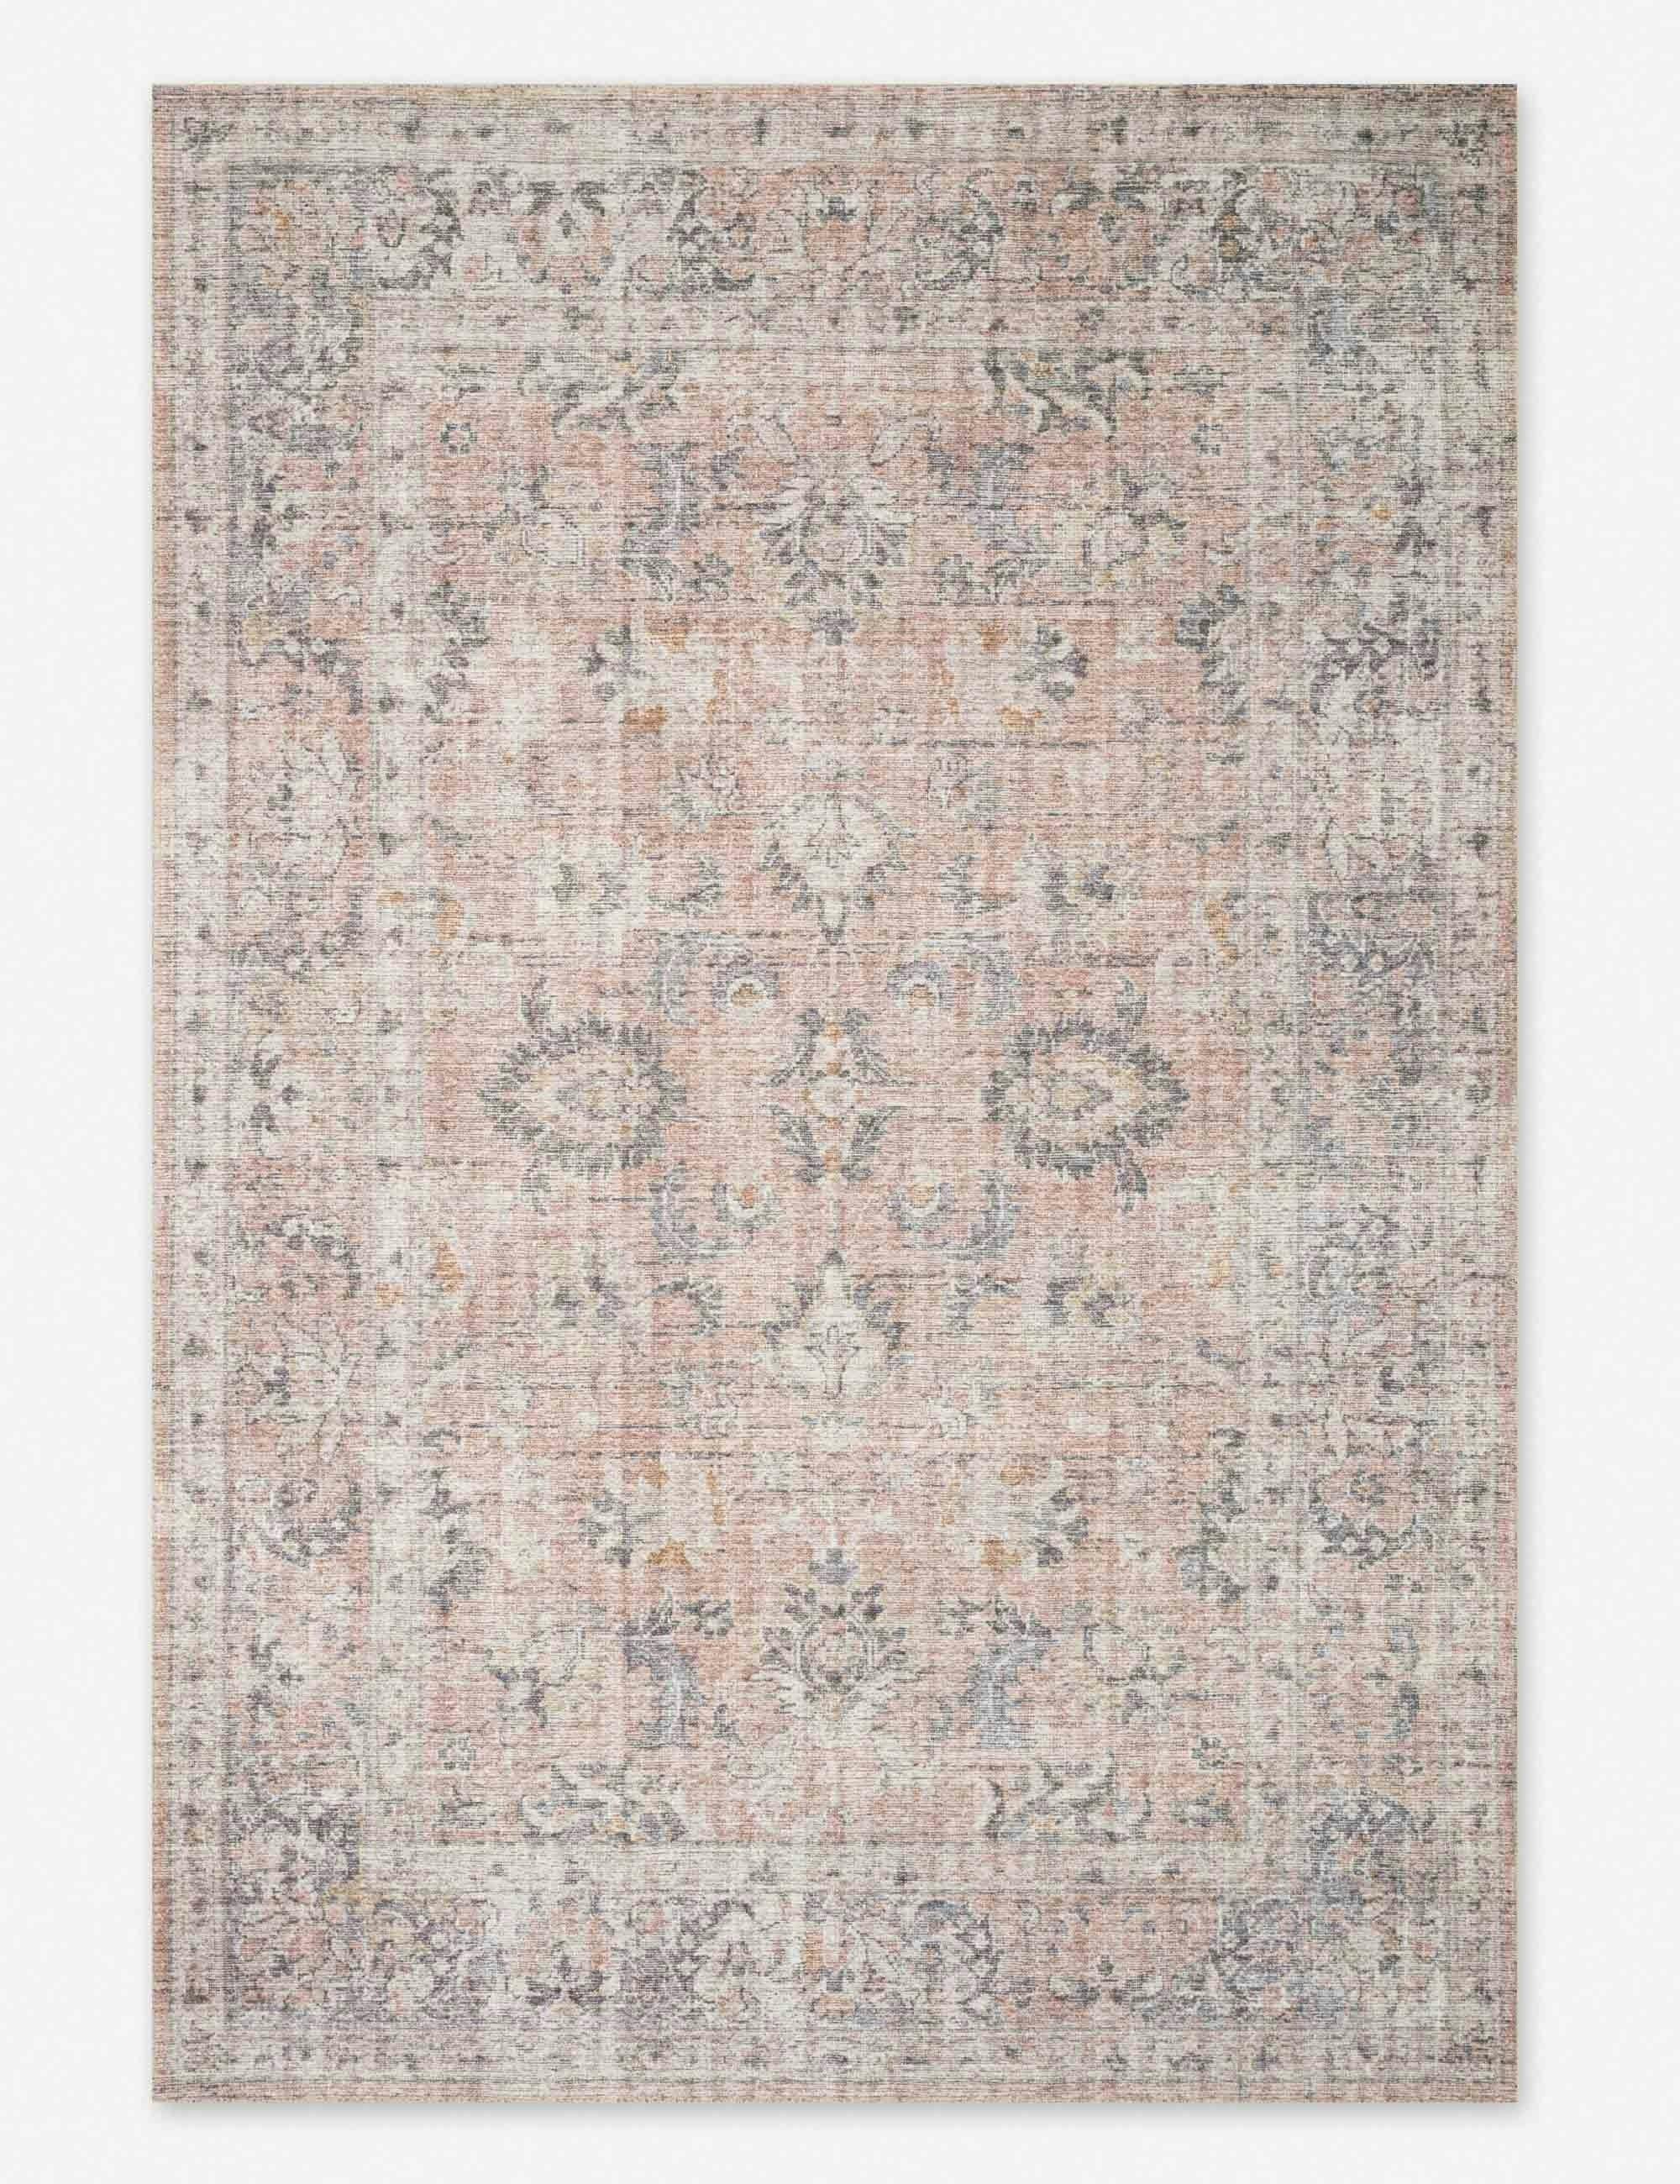 Roze Rug - Blush and Grey / 9' x 12'